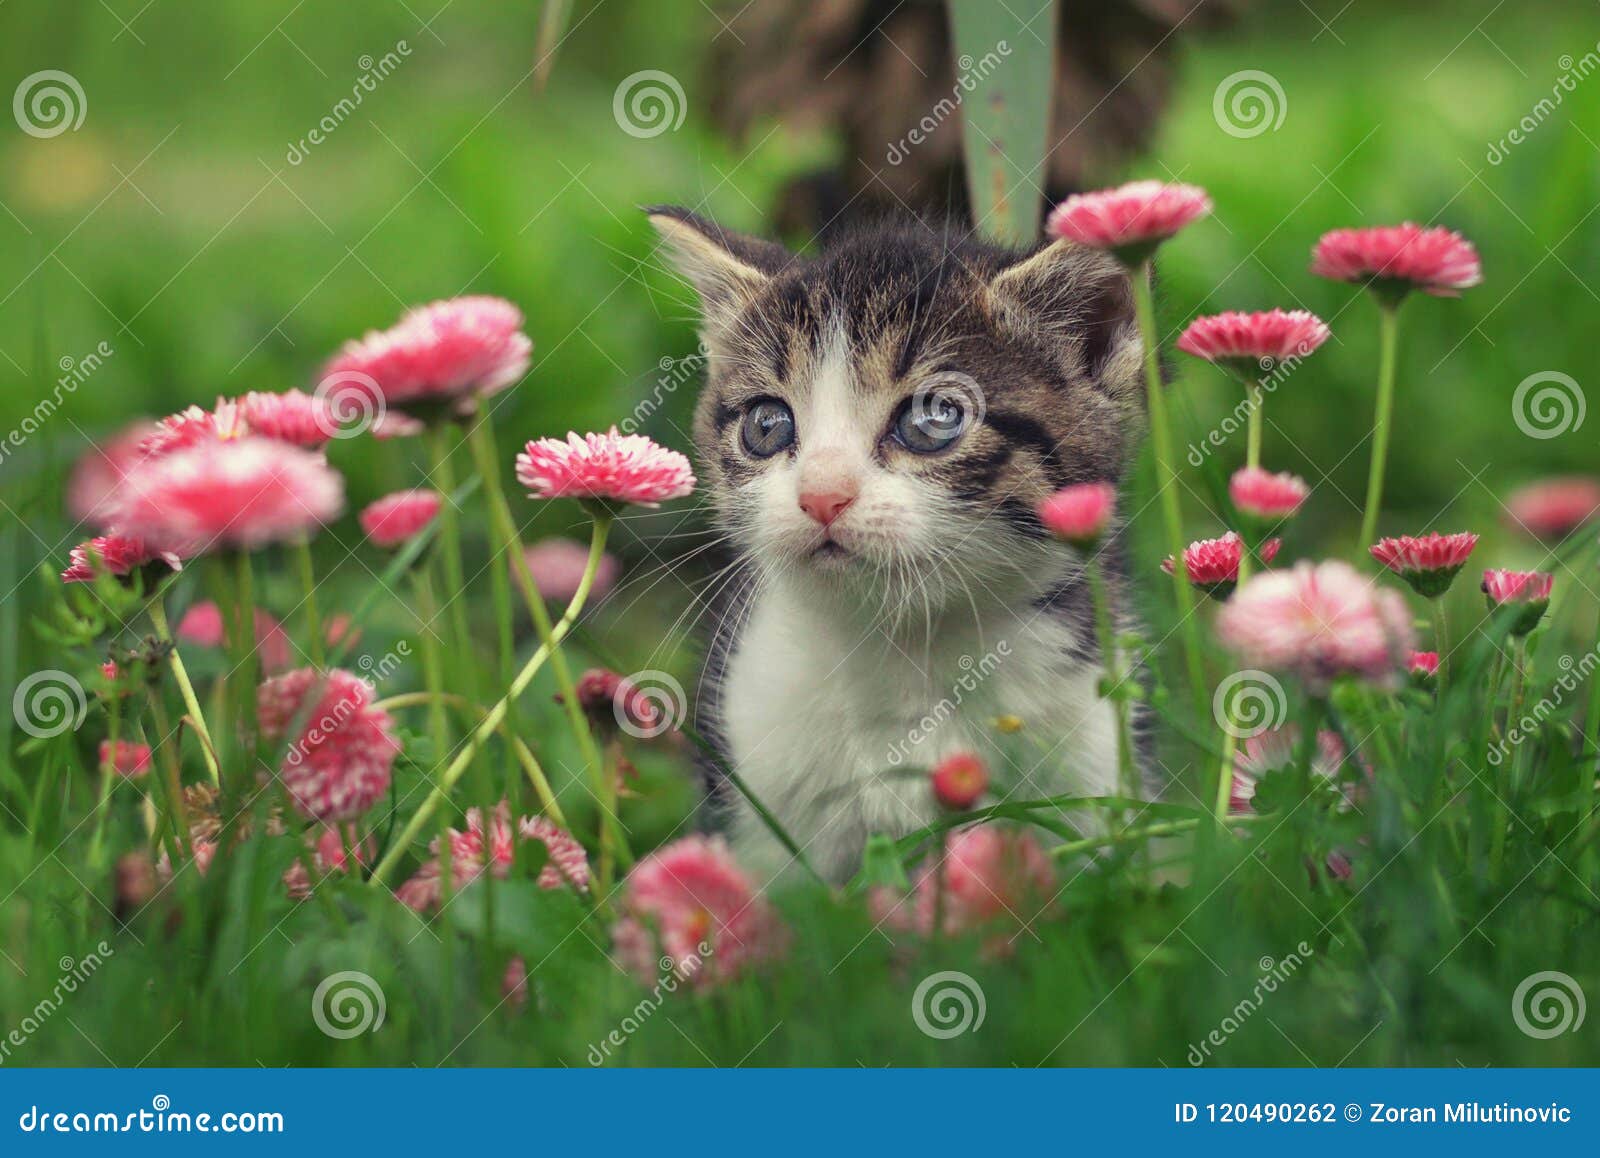 Cute kitten in the flowers stock photo. Image of adorable - 120490262